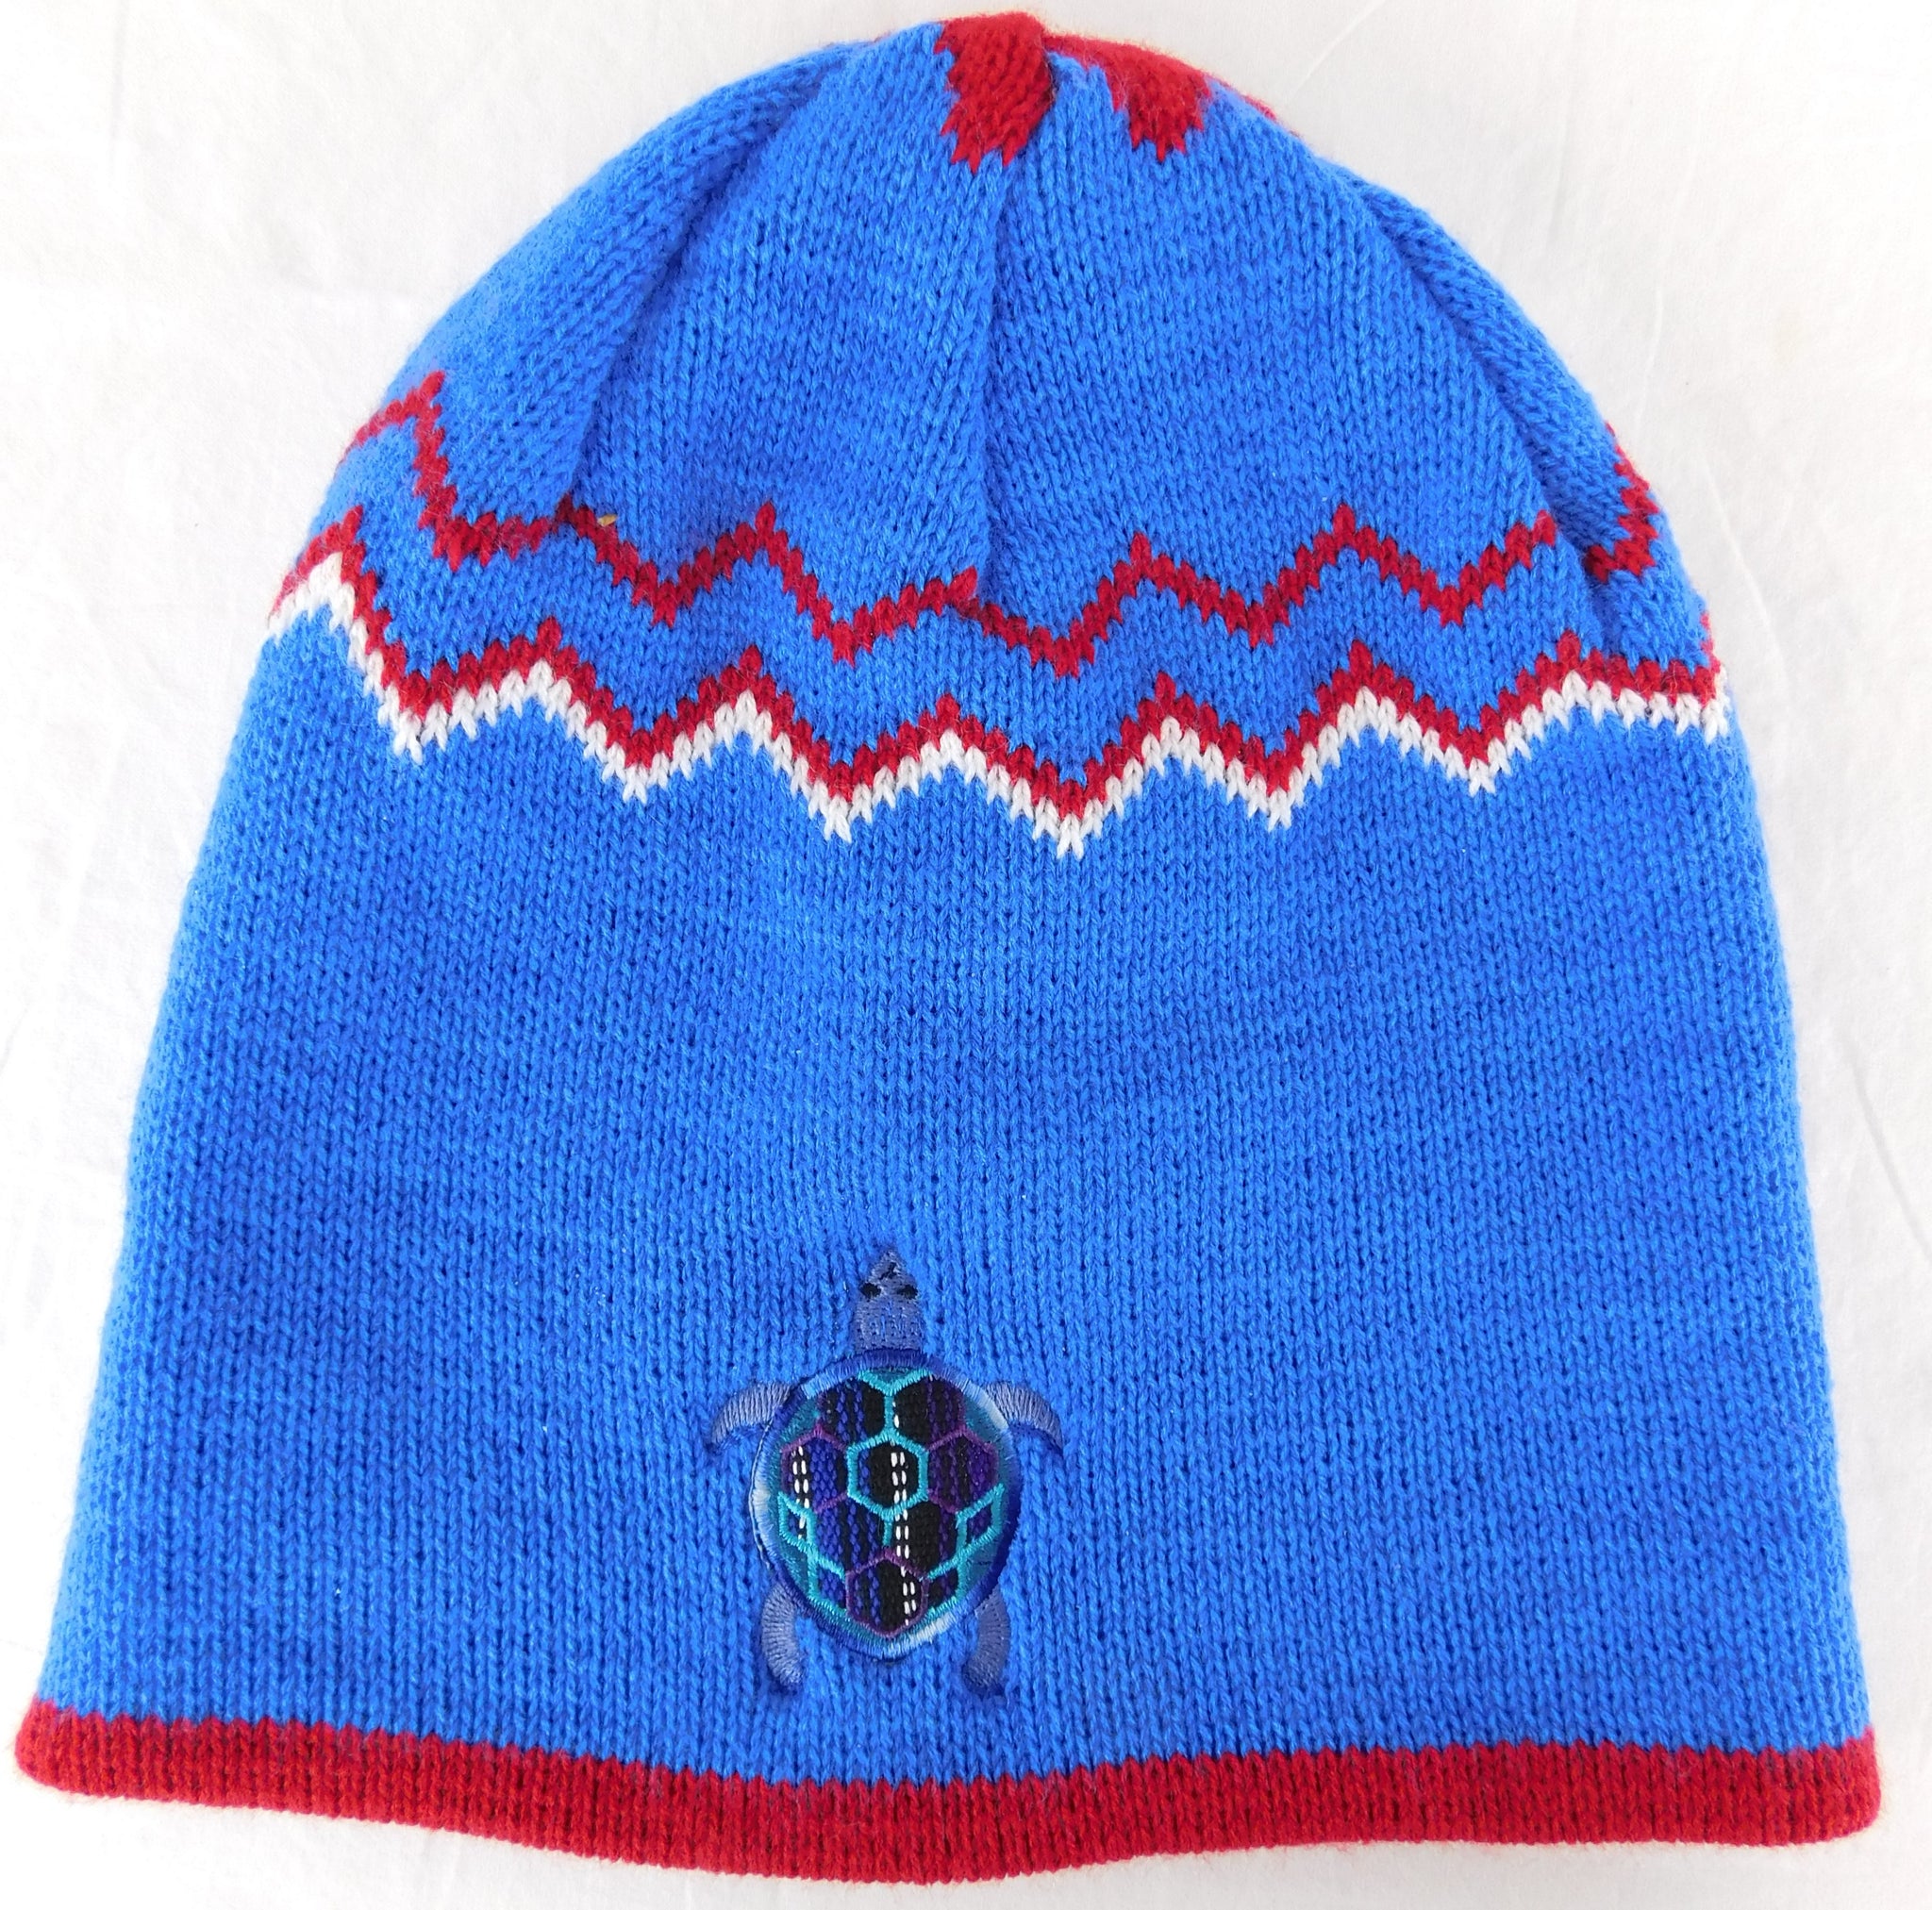 Knit Festival Cap with Terrapin Embroidery & Applique